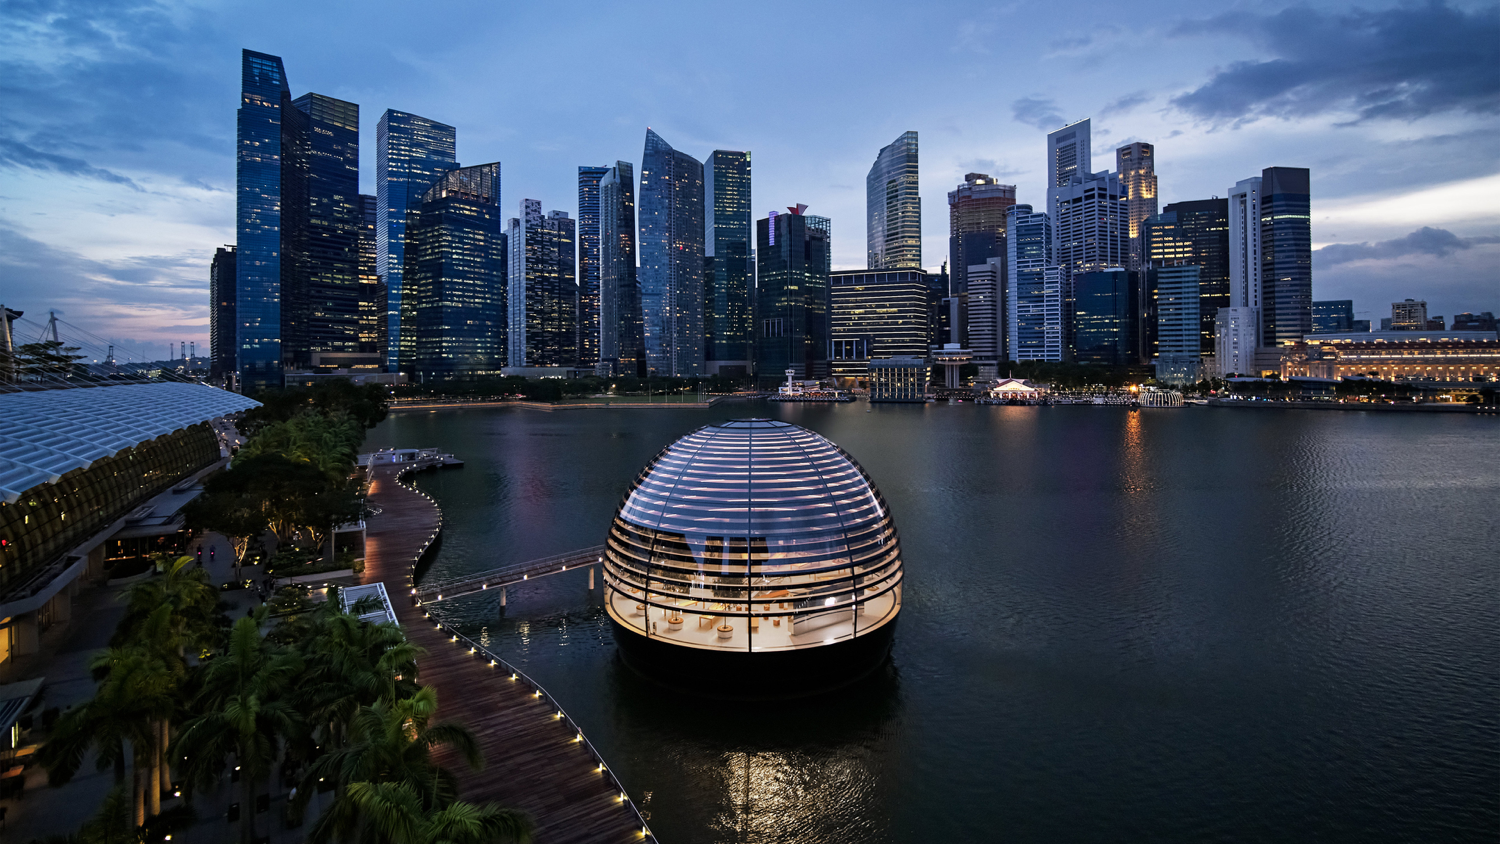 Louis Vuitton Floating Store Singapore Addressed